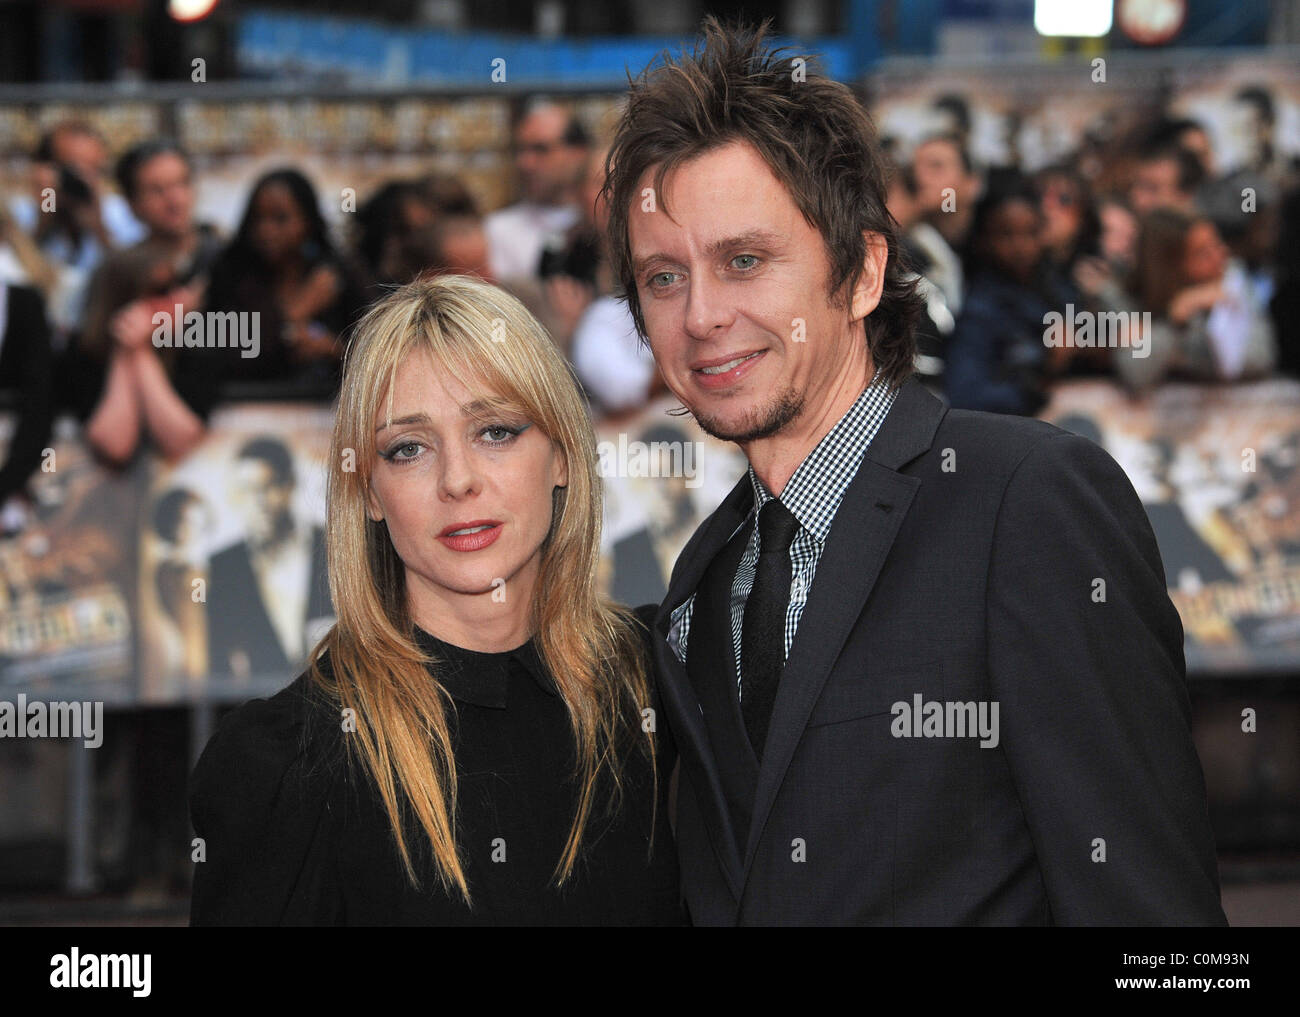 Matt King and Guest 'Rocknrolla' World Premiere held at the Odeon West End  - Arrivals London, England - 01.09.08 Stock Photo - Alamy